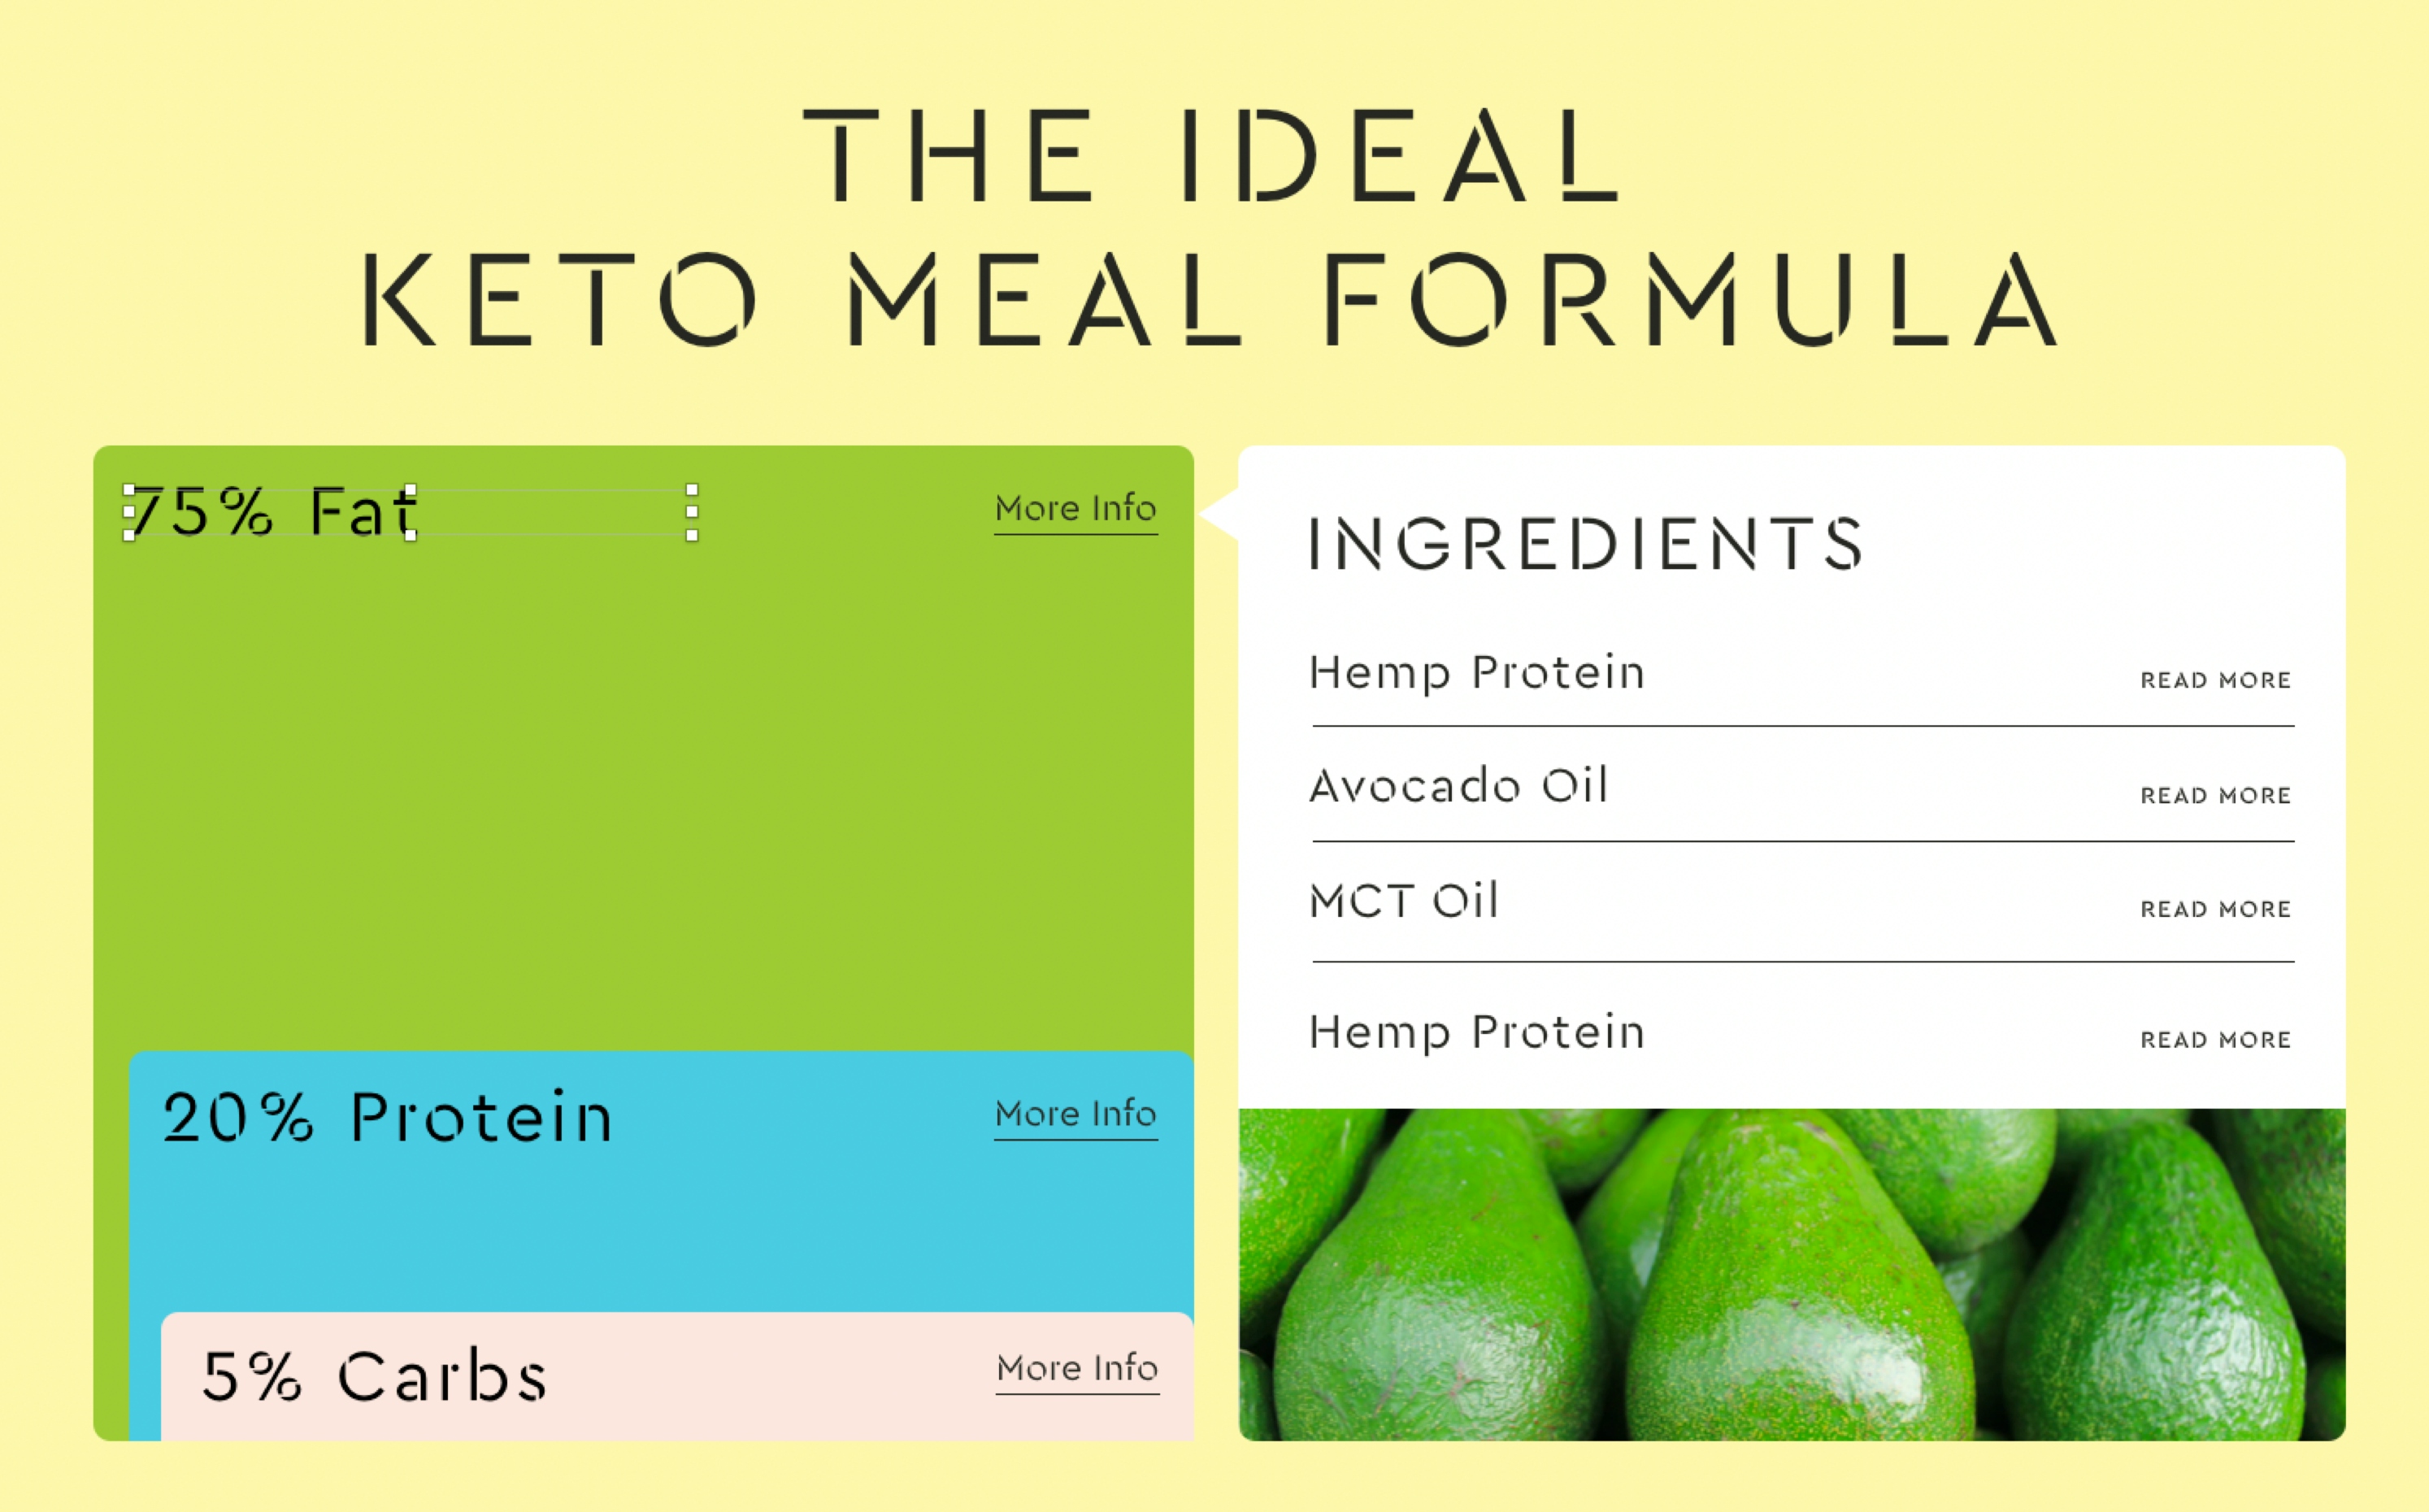 A lemon webpage states “The ideal Keto meal formula”. On the left hand side is a column-style infographic showing the fat, protein and carbs percentage and to the right is the ingredients list. Under the ingredients is a close up of avocados.